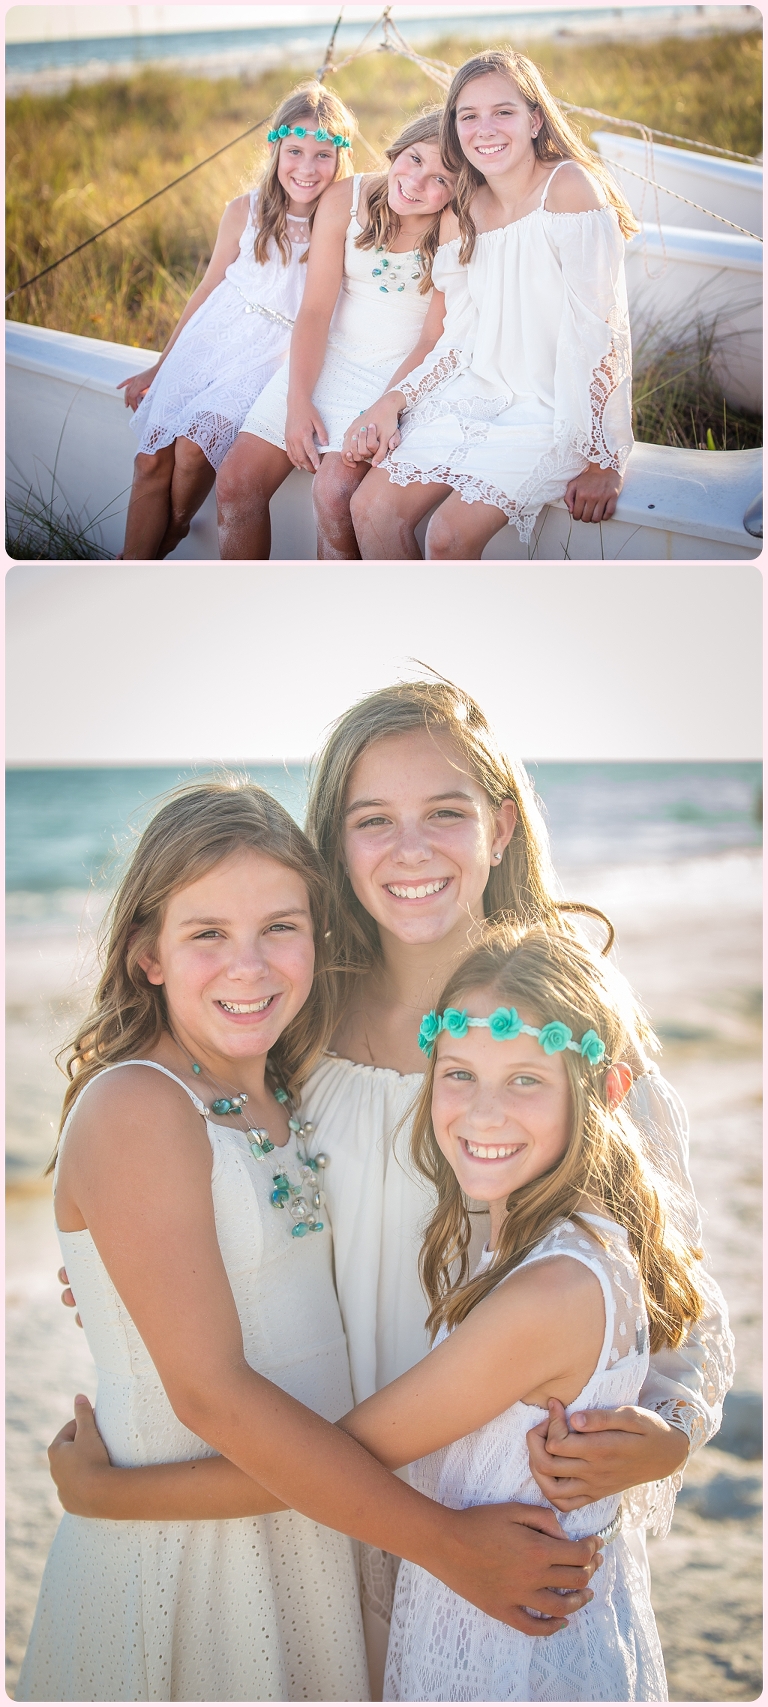 Sunset beach session at Siesta Key by Sarasota portrait photographer www.ristainophotography.com